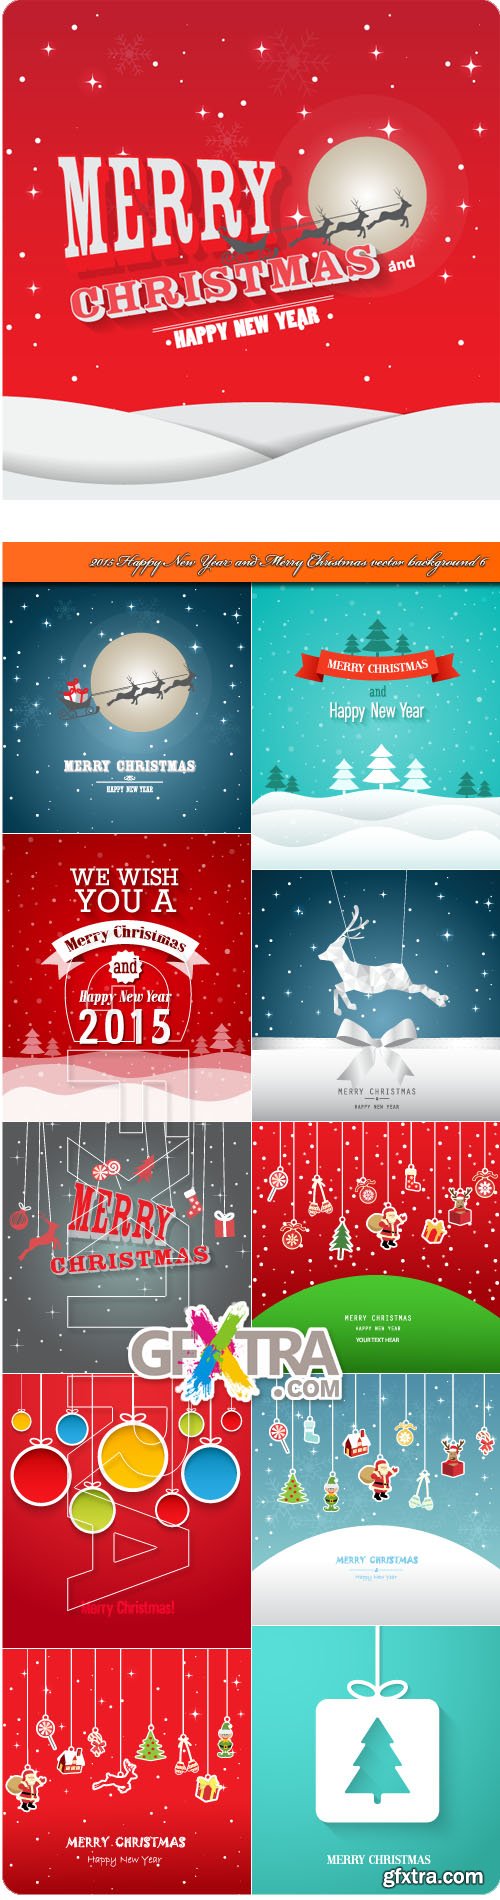 2015 Happy New Year and Merry Christmas vector background 6